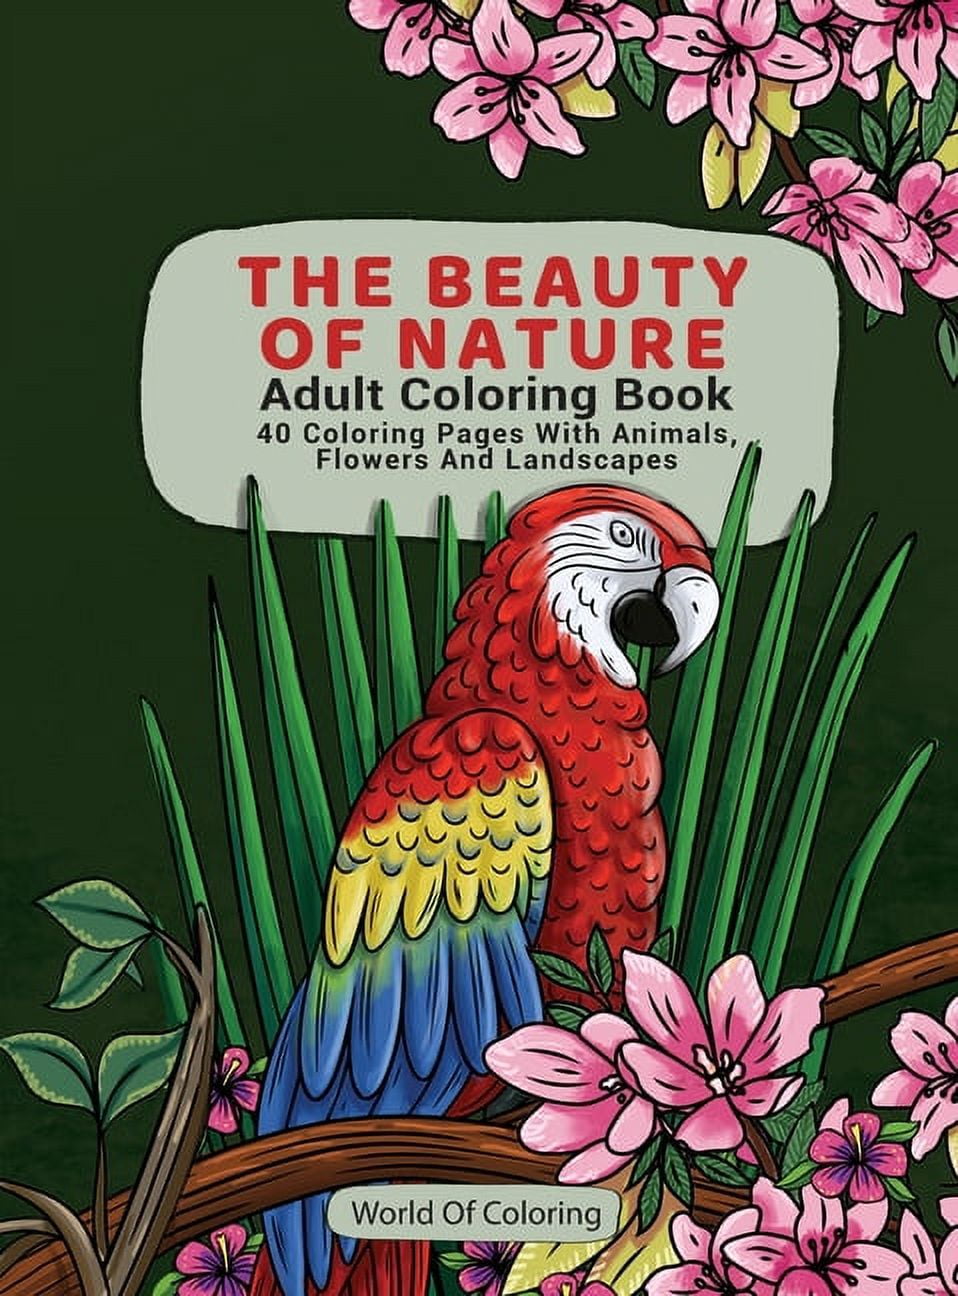 Adult Coloring Book: The Beauty of Nature, 40 Coloring Pages with Animals, Flowers and Landscapes [Book]